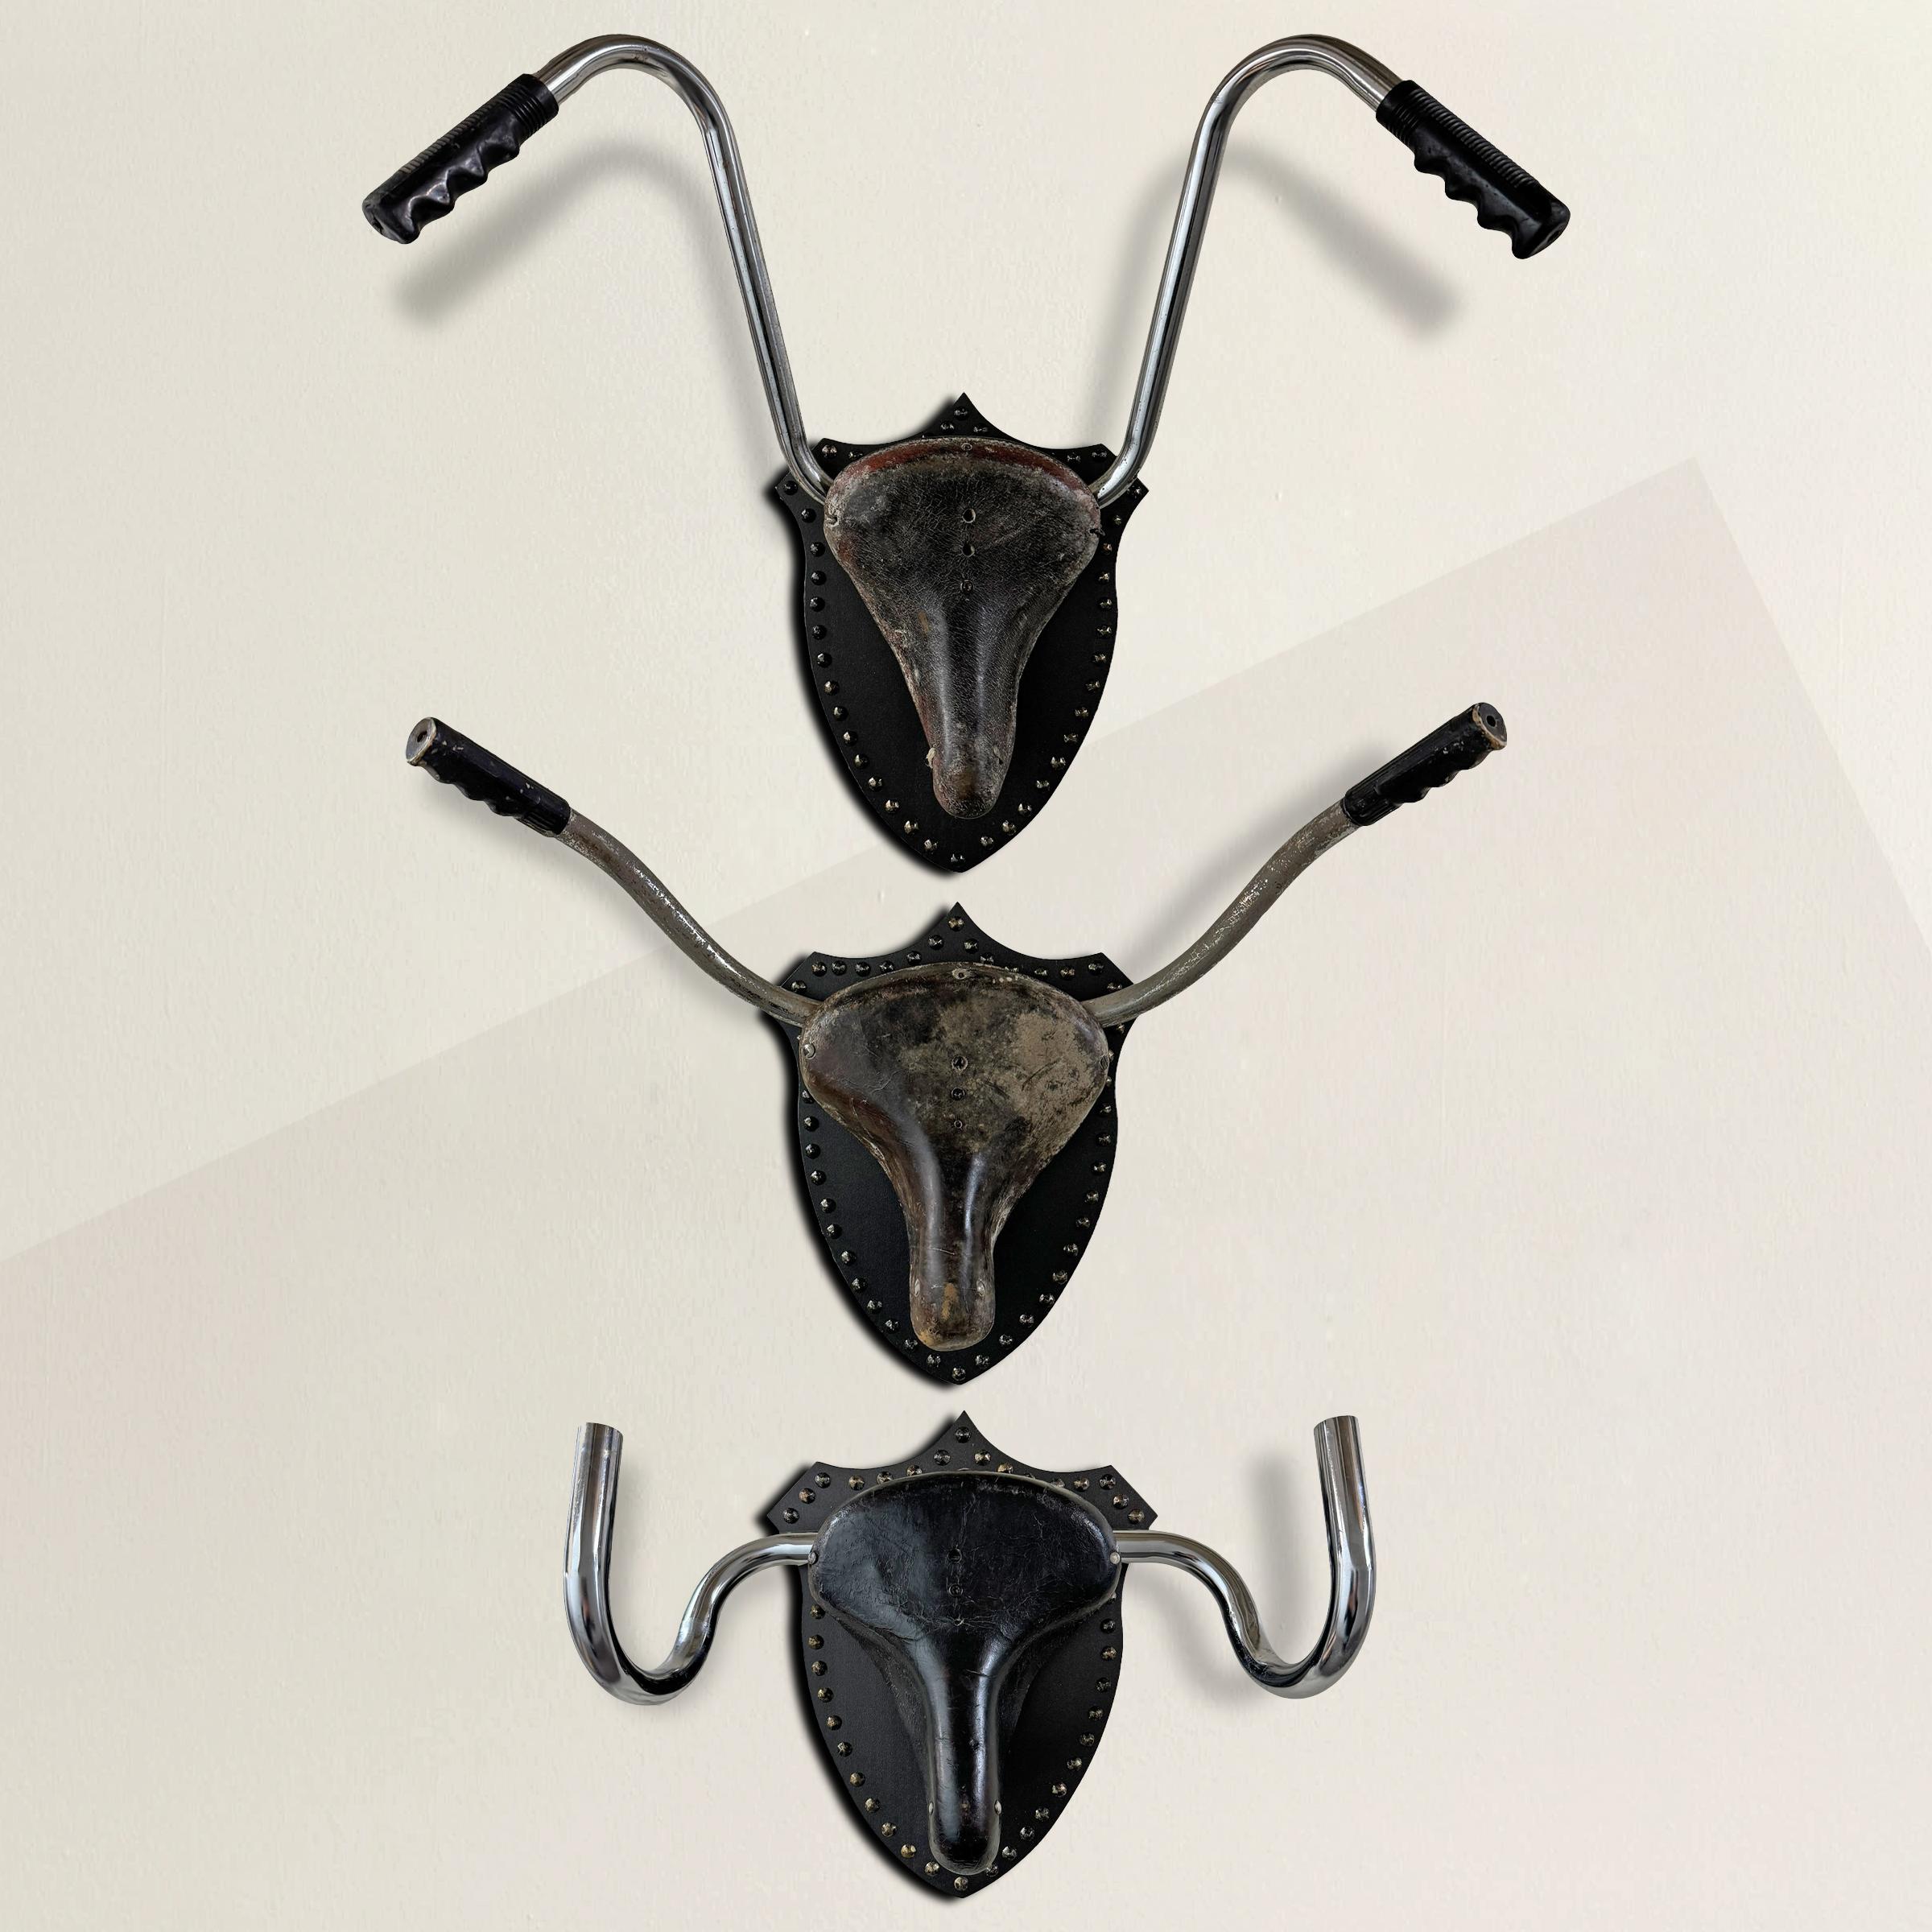 Embark on a journey through art history with this playful yet serious set of three bicycle seat and handlebar sculptures, paying homage to Picasso's groundbreaking 